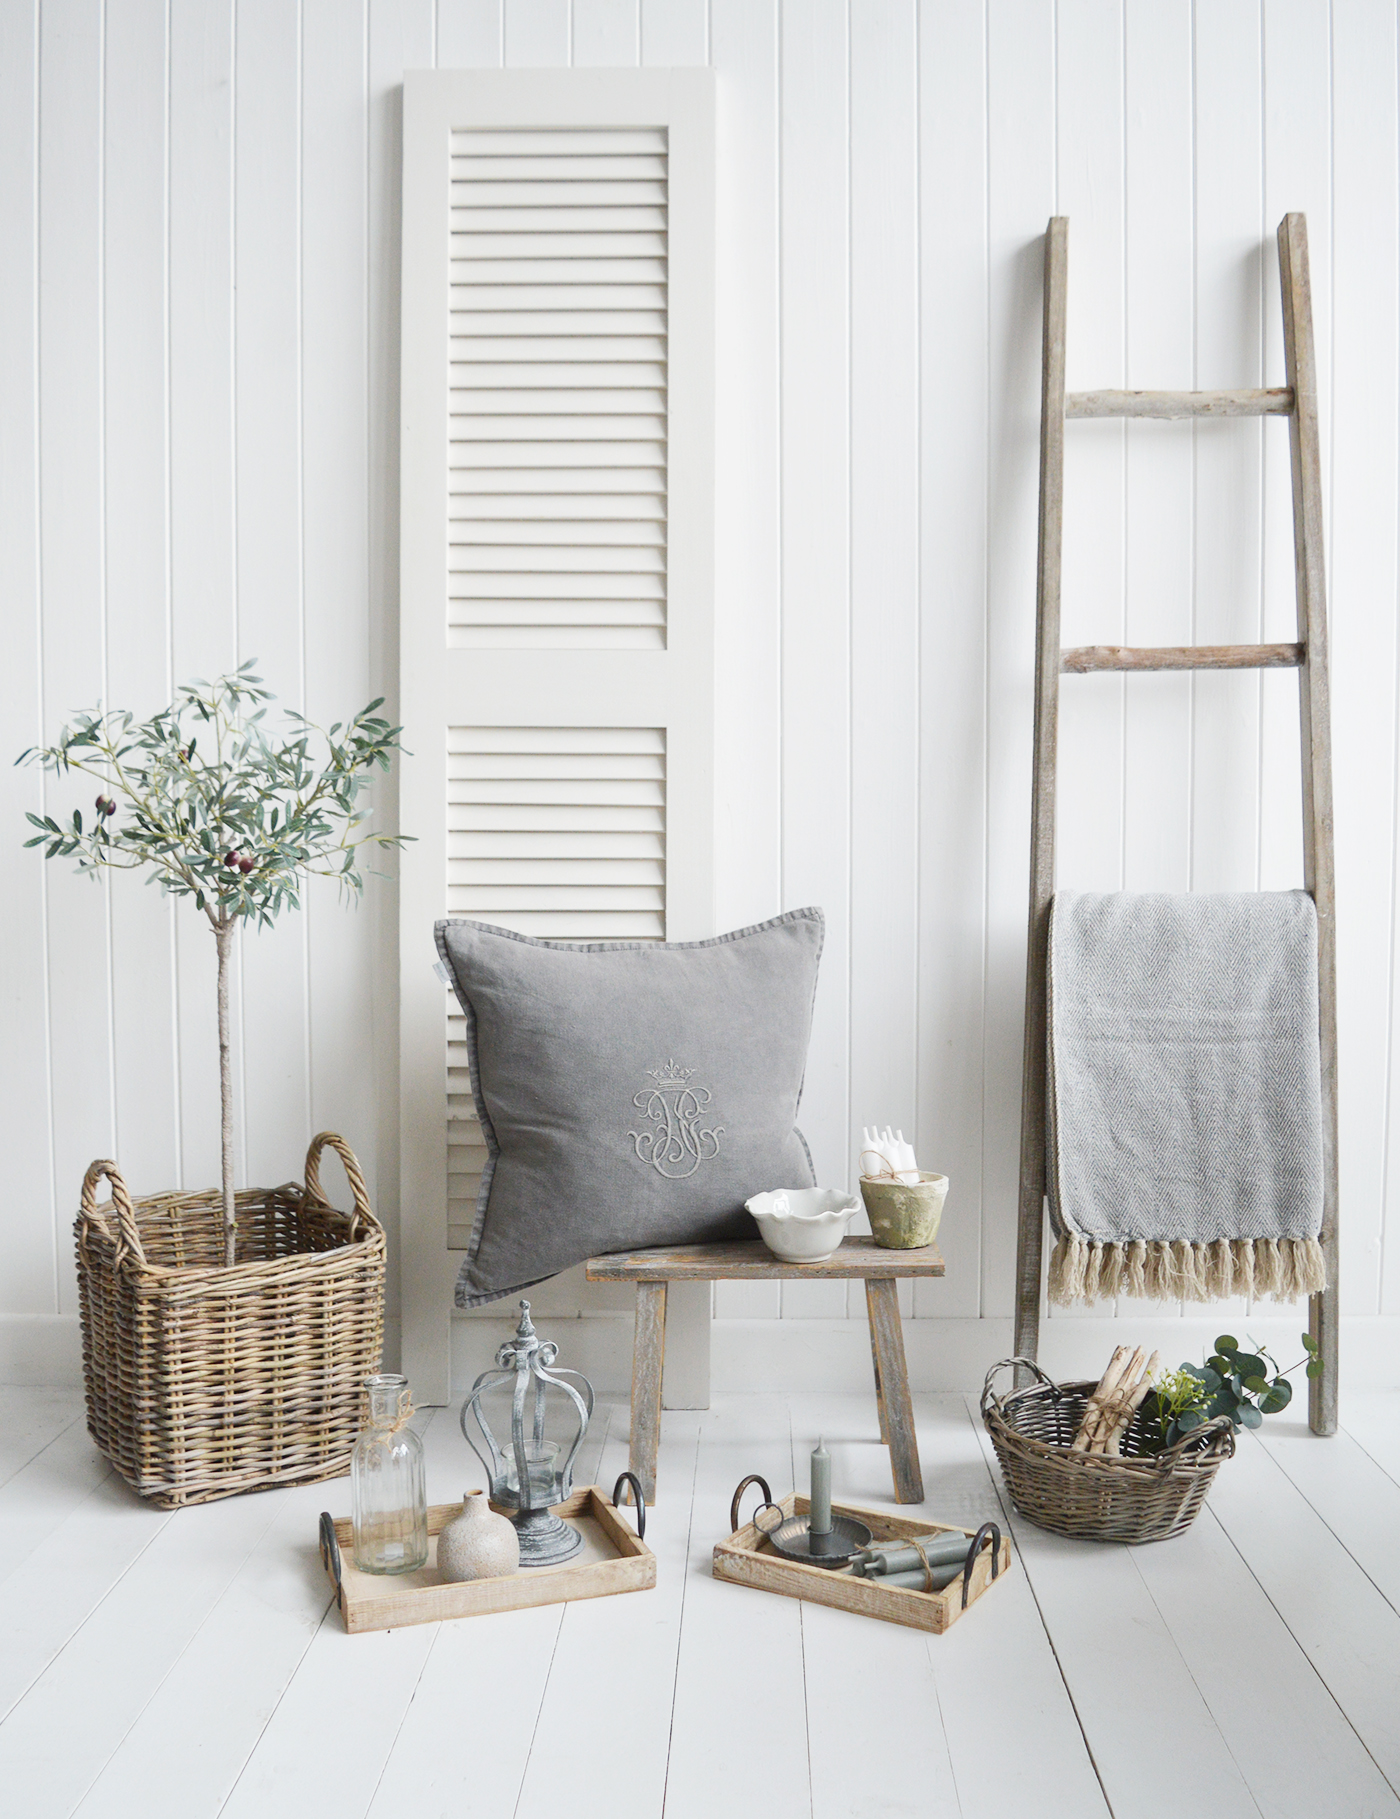 new England home decor and accessories for coastal, country, modern farmhouse and country homes and interiors. Items include wooden driftwood blanket ladder, artificial olive tree, pawtucket tray and rustic decorative stool and baskets